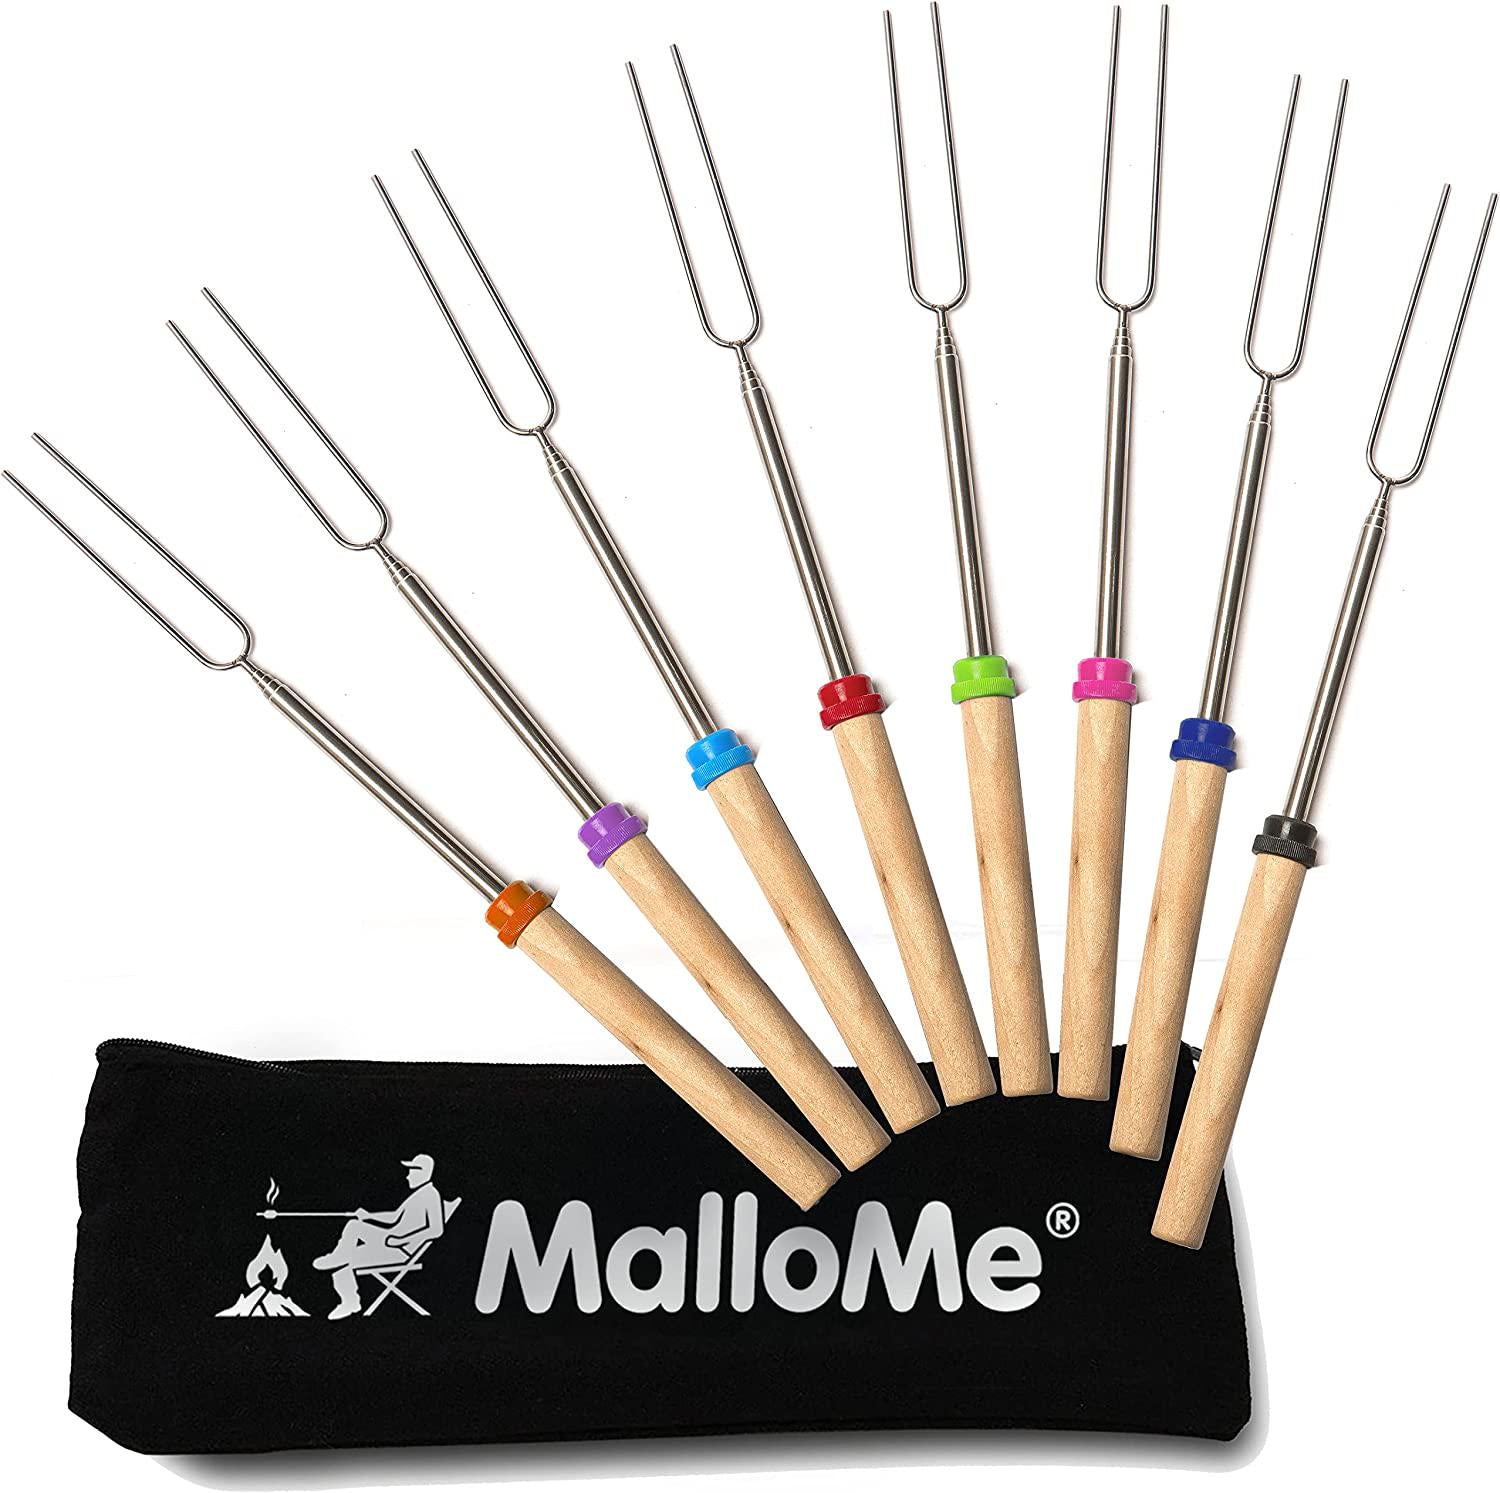 MalloMe, MalloMe Marshmallow Roasting Sticks Extending Roaster Set of 8 Telescoping Smores Skewers and Hot Dog Forks 32 Inch Fire Pit Camping Cookware Campfire Cooking Kids FREE Bag 10 Sticks and Ebook